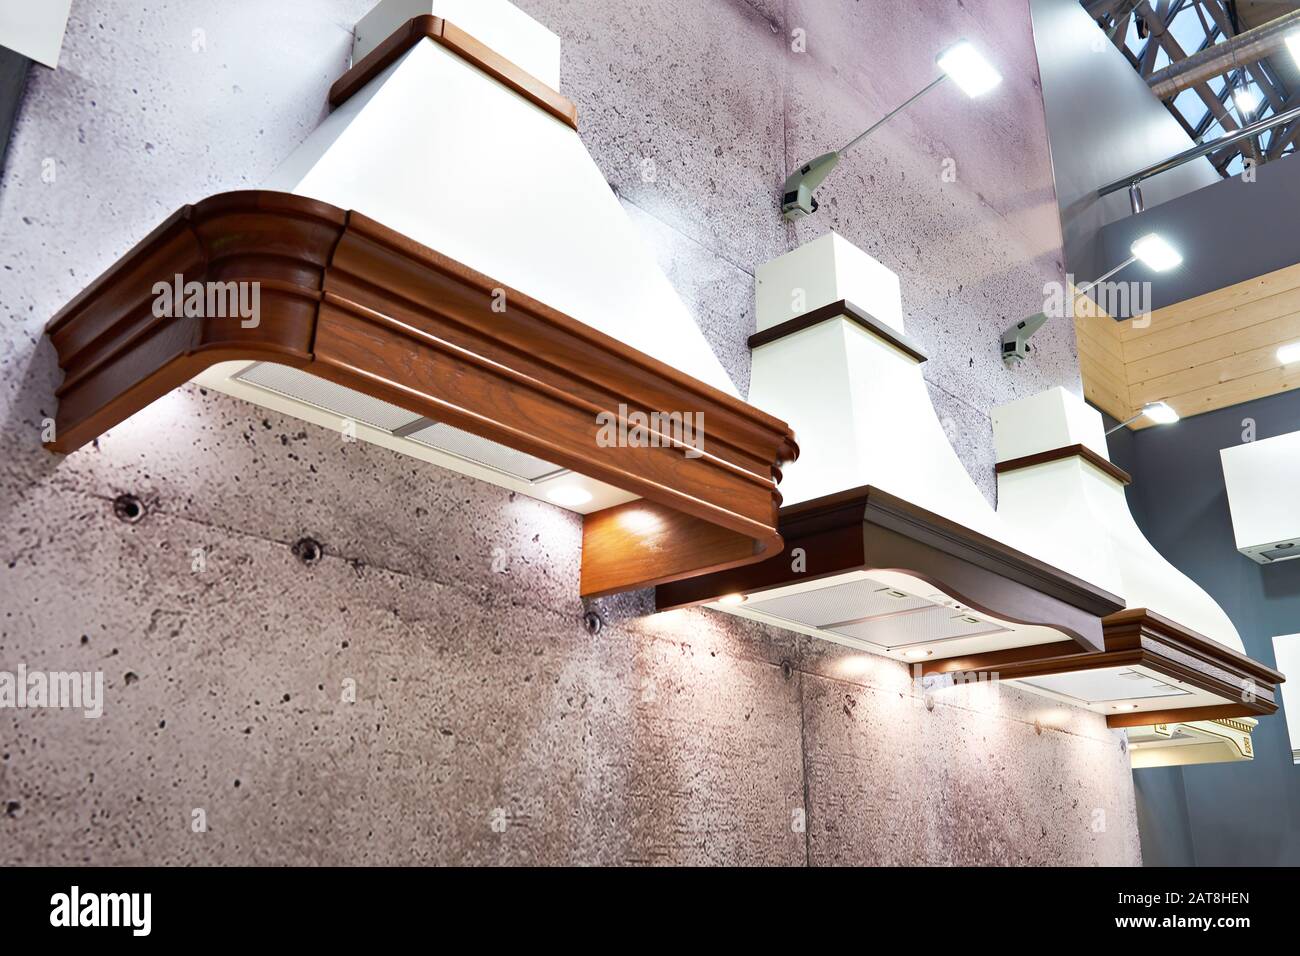 Department store selling kitchen hoods Stock Photo